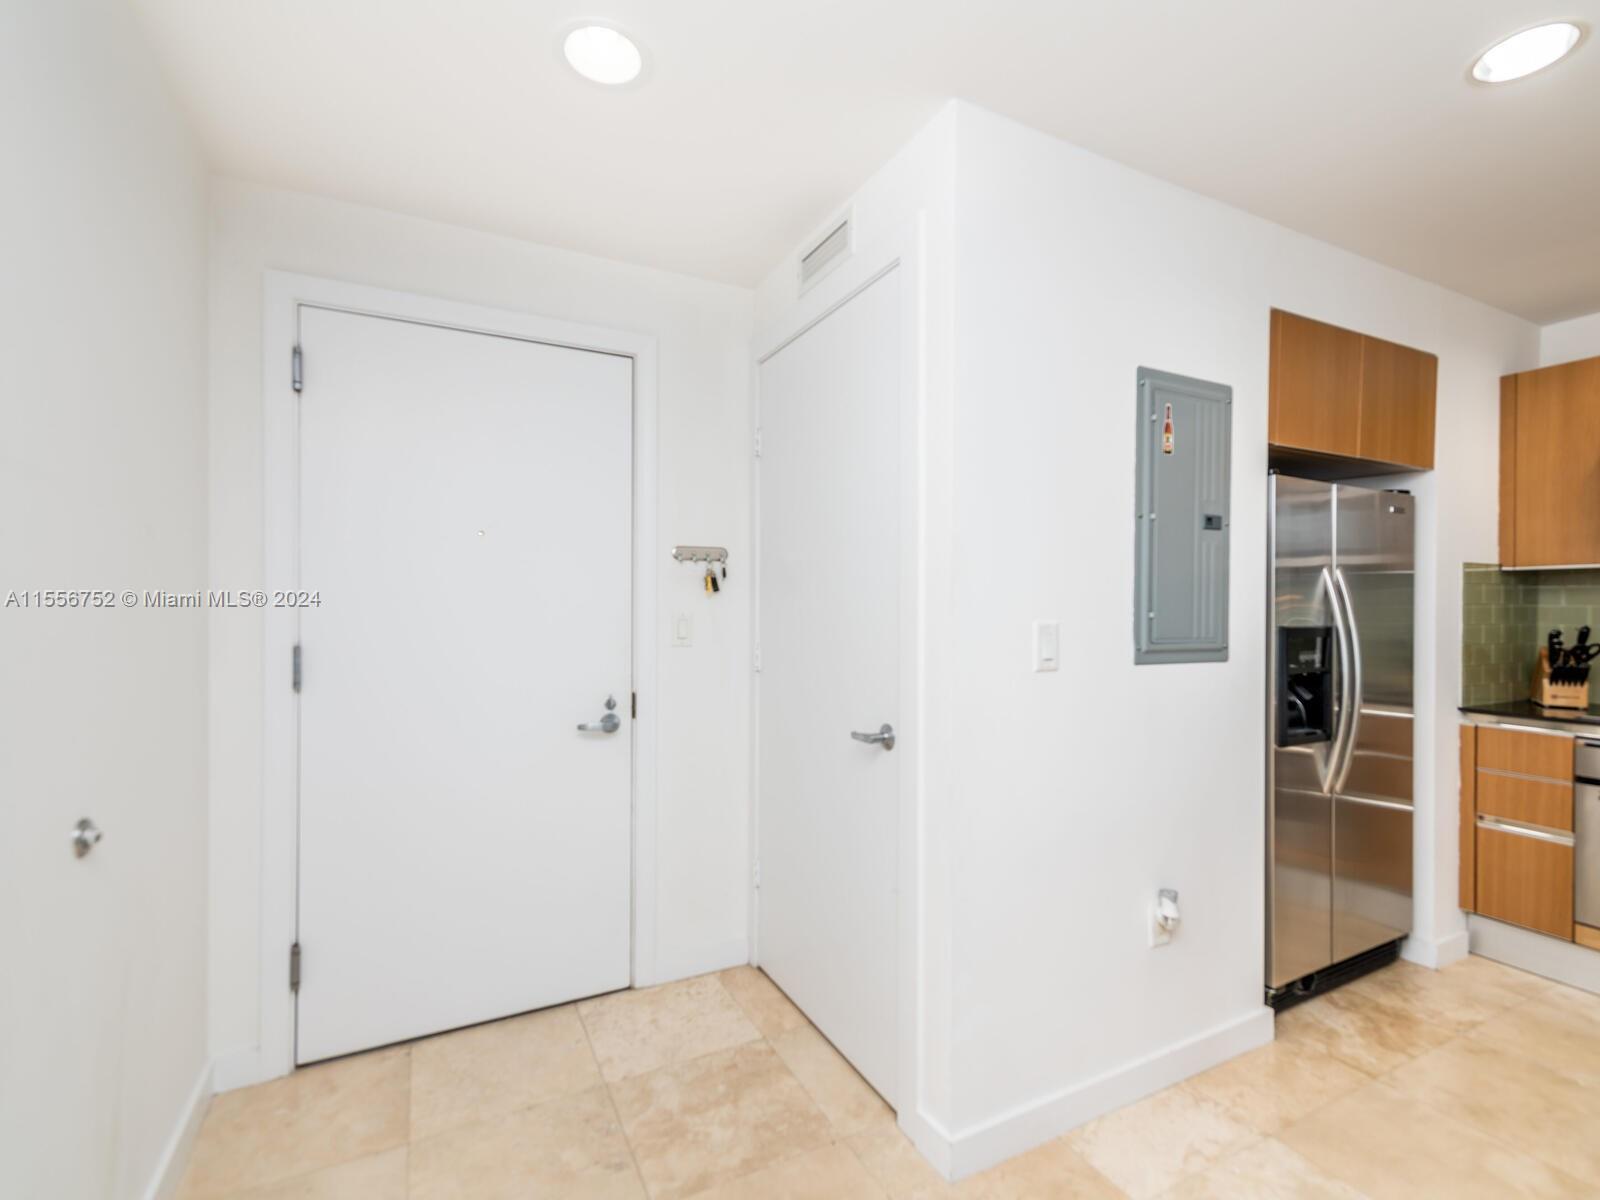 Beautiful 1 bedroom  1 bath unit with  amazing East view, located  in the heart of Brickell Avenue. Unit features:  Granite countertops, stainless steel appliances, Italian style kitchen, Large bathroom with bathtub/ shower combination;  windows treatment throughout; beautiful marble floor and balcony; nice amenities in this centrally located building, walking distance to Brickell Citi Center, Mary Brickell Village, many restaurants, supermarkets, people mover station and much more!